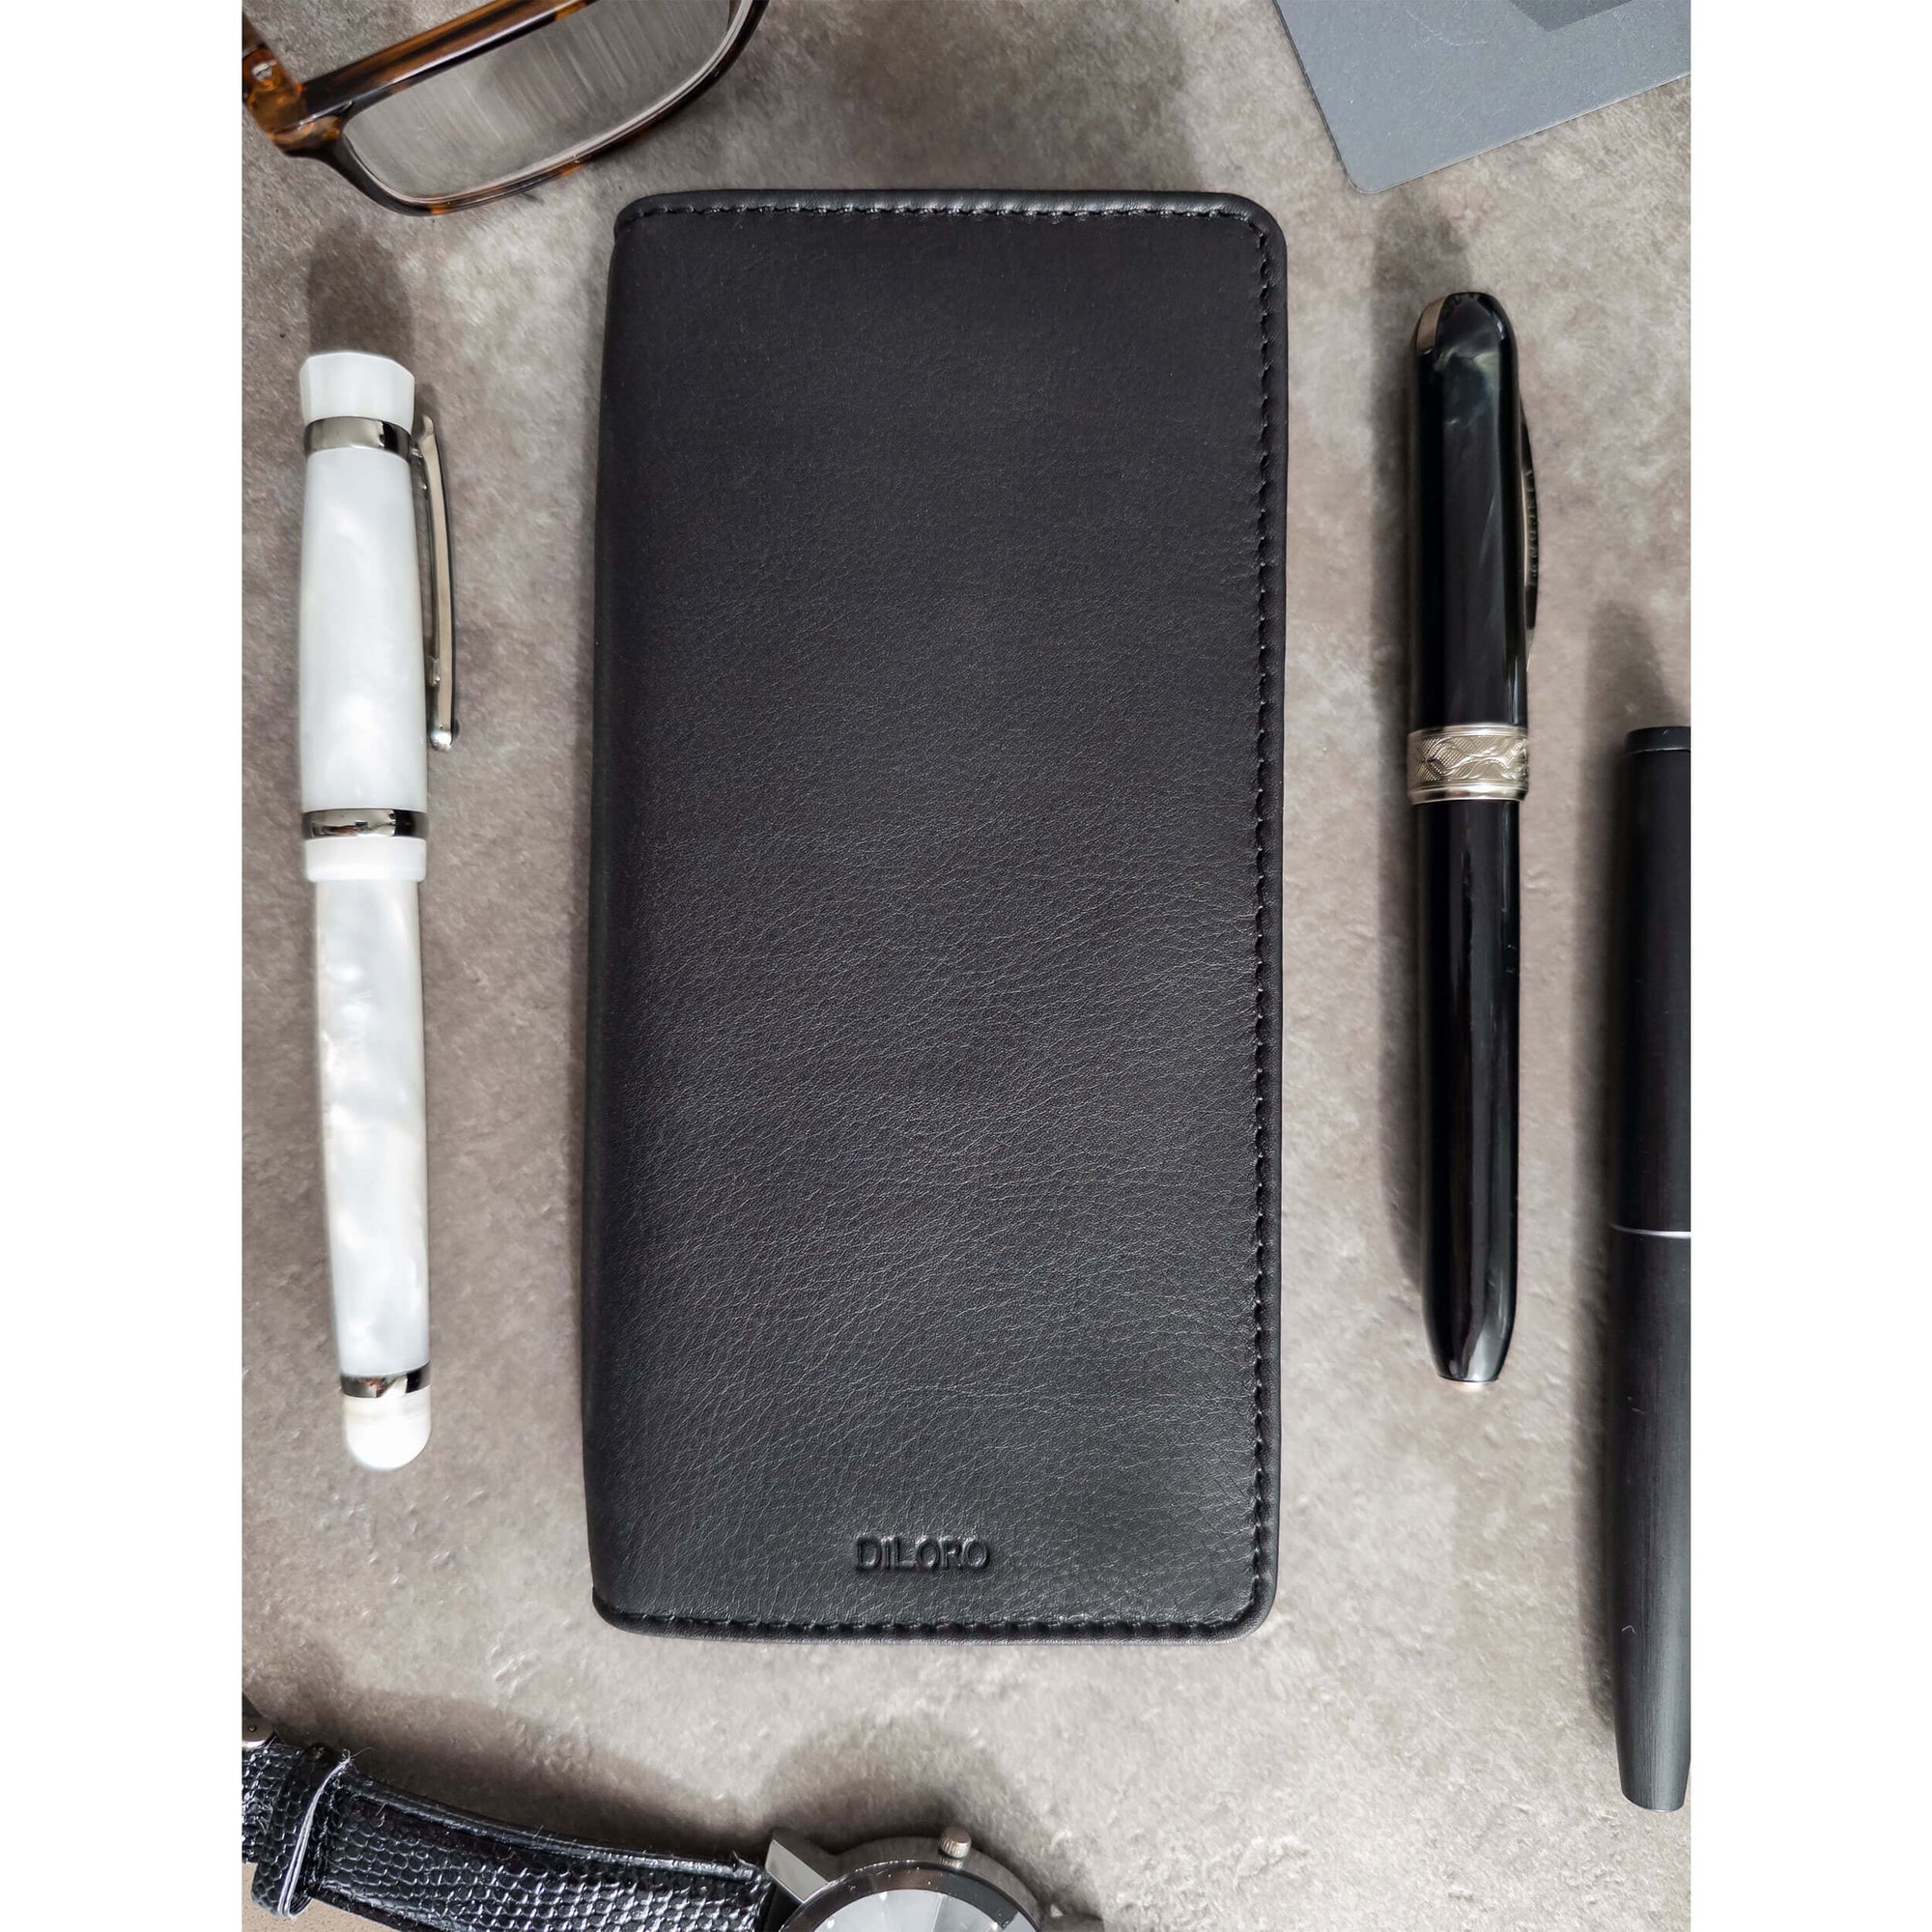 Leather Pen Holder | Handmade Leather Fountain Pen Pouch